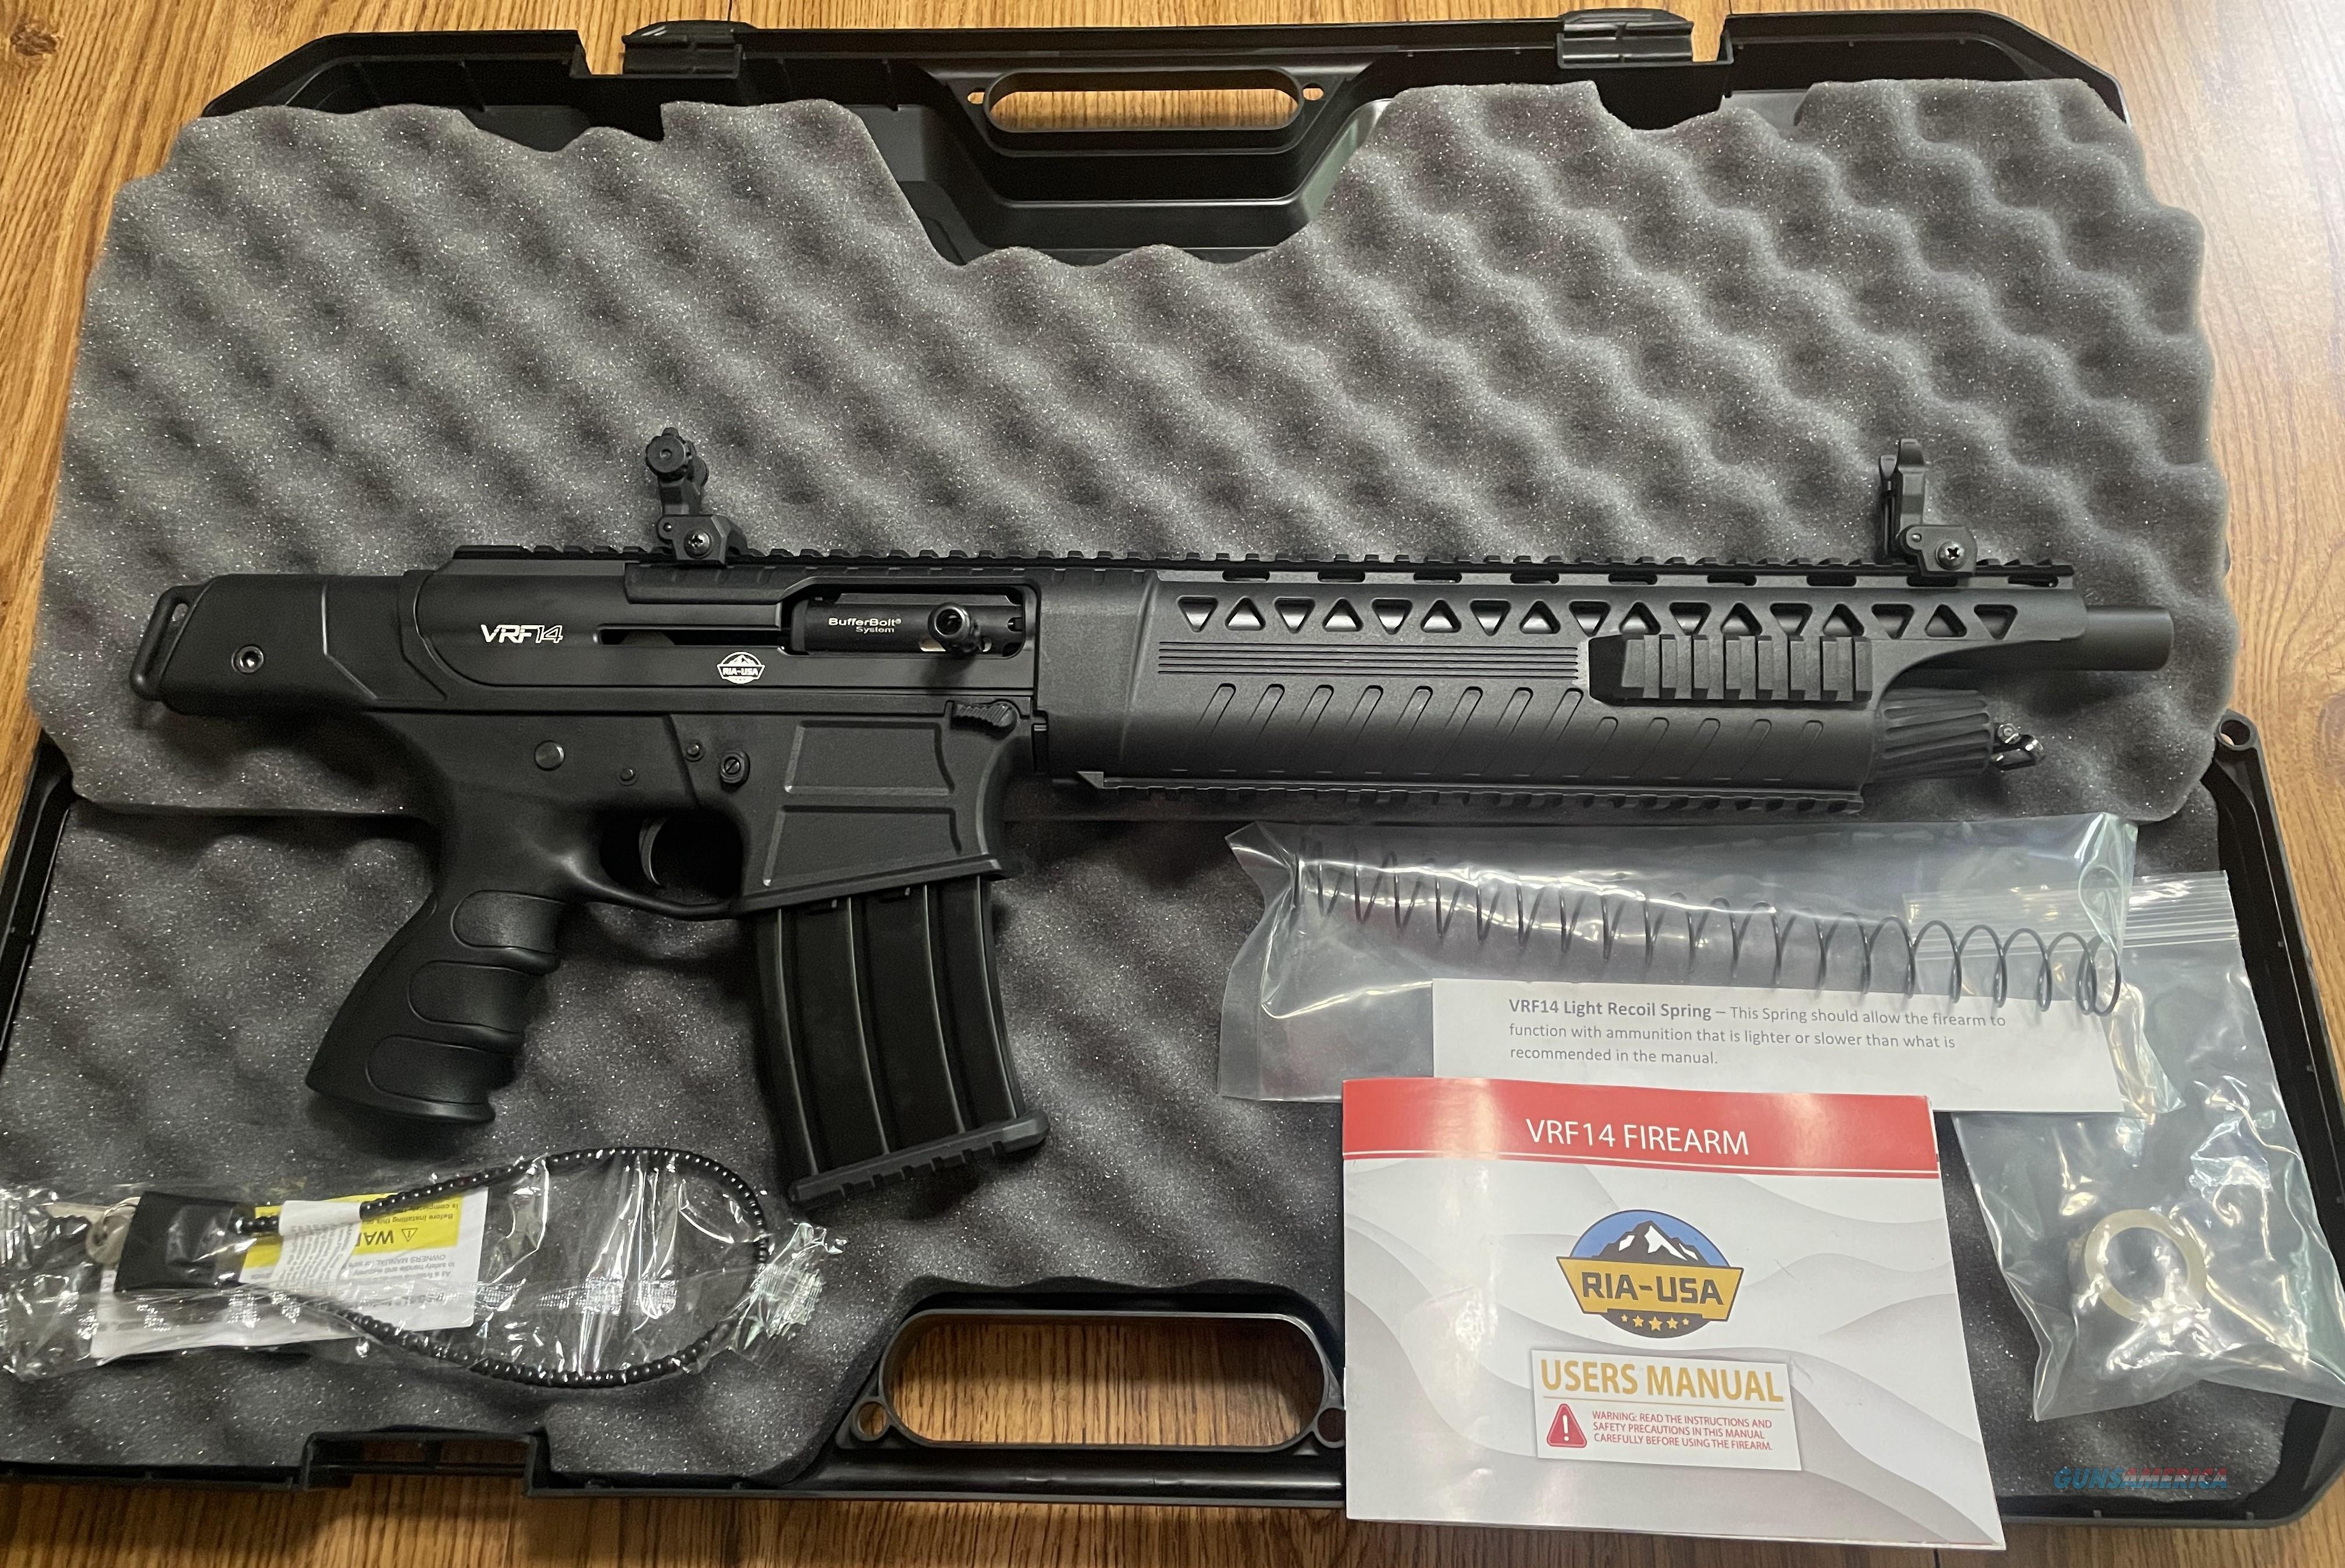 Rock Island Armory Vrf14 12 Gauge 3 For Sale At 965023367 7589